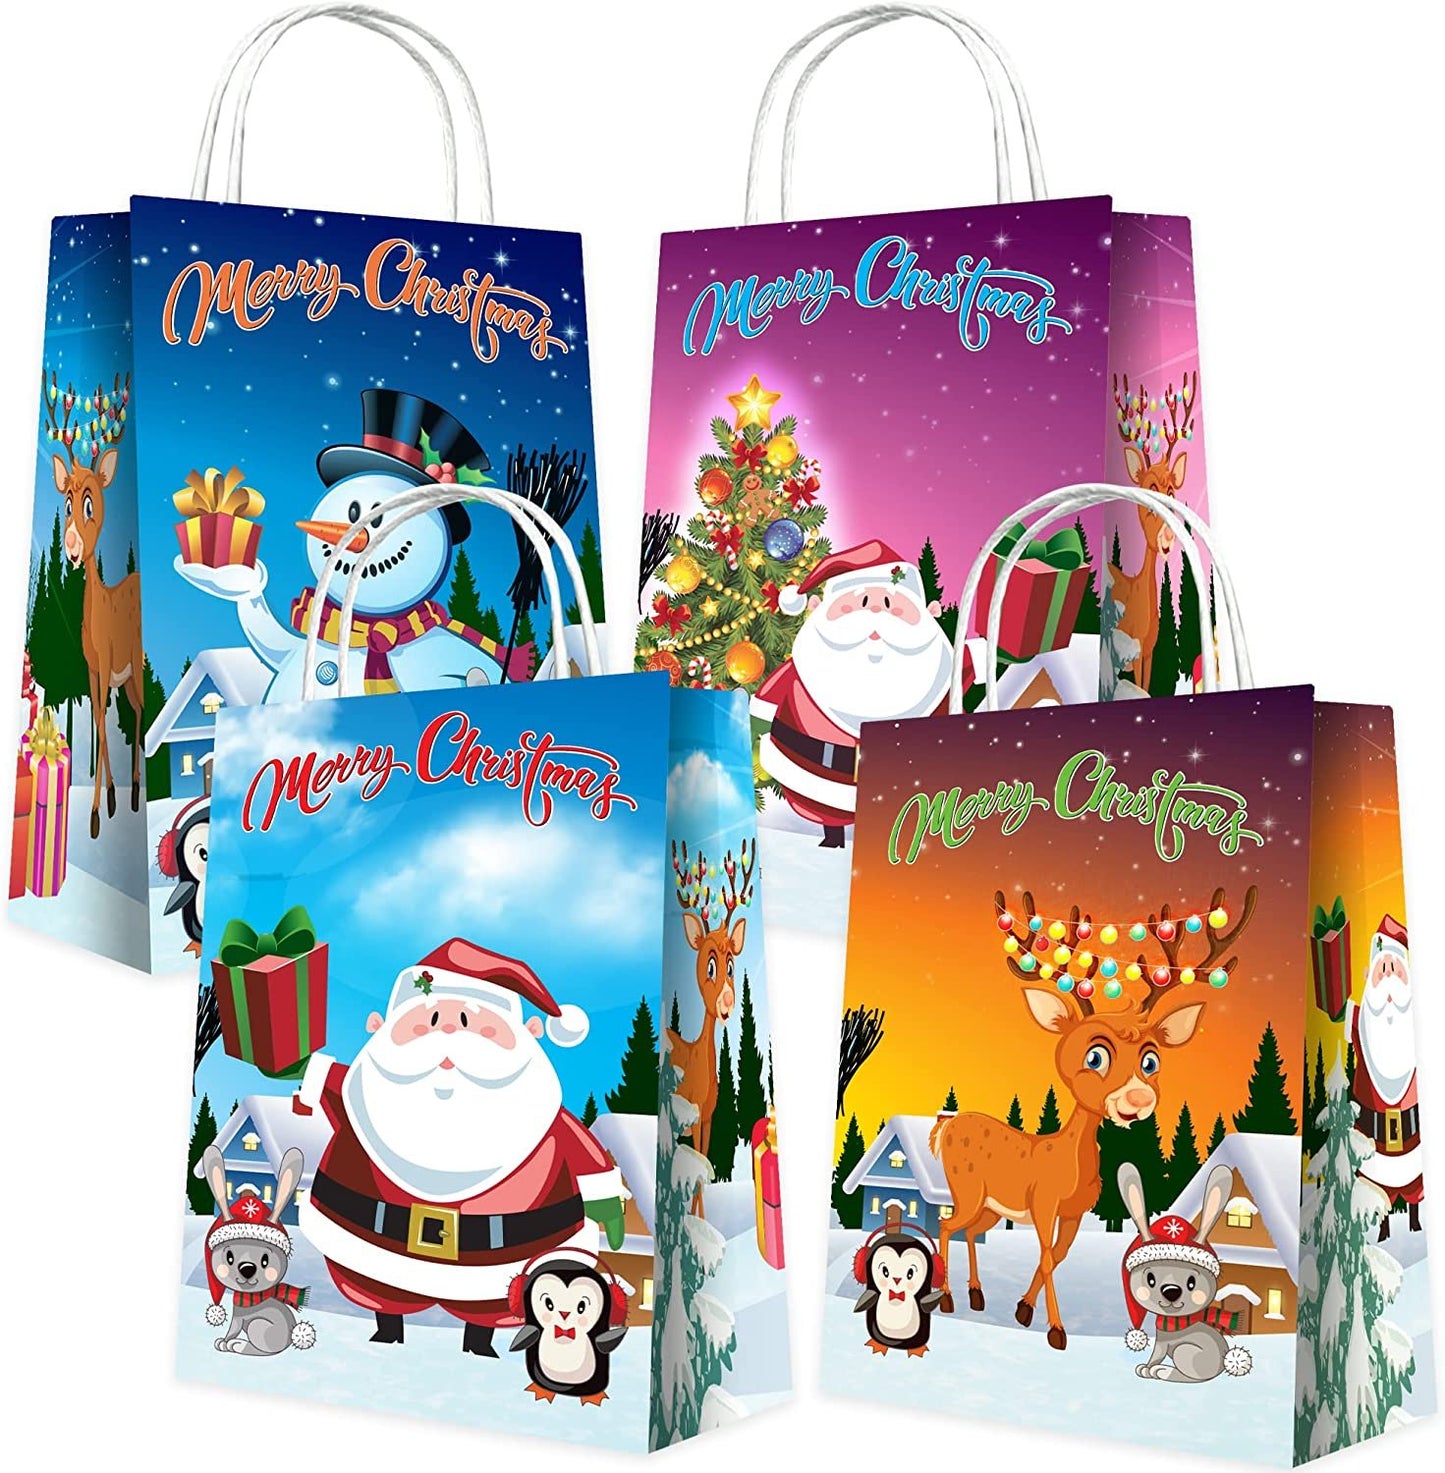 Christmas Gift Bags with Handles, 4 Designs, Set of 12, Xmas Gift Bags, Medium Size 8.75" x 6" Paper Bags with Sturdy Handles, Assorted Christmas Prints for Party Favors, Sweets, Candy, Gifts, Treats